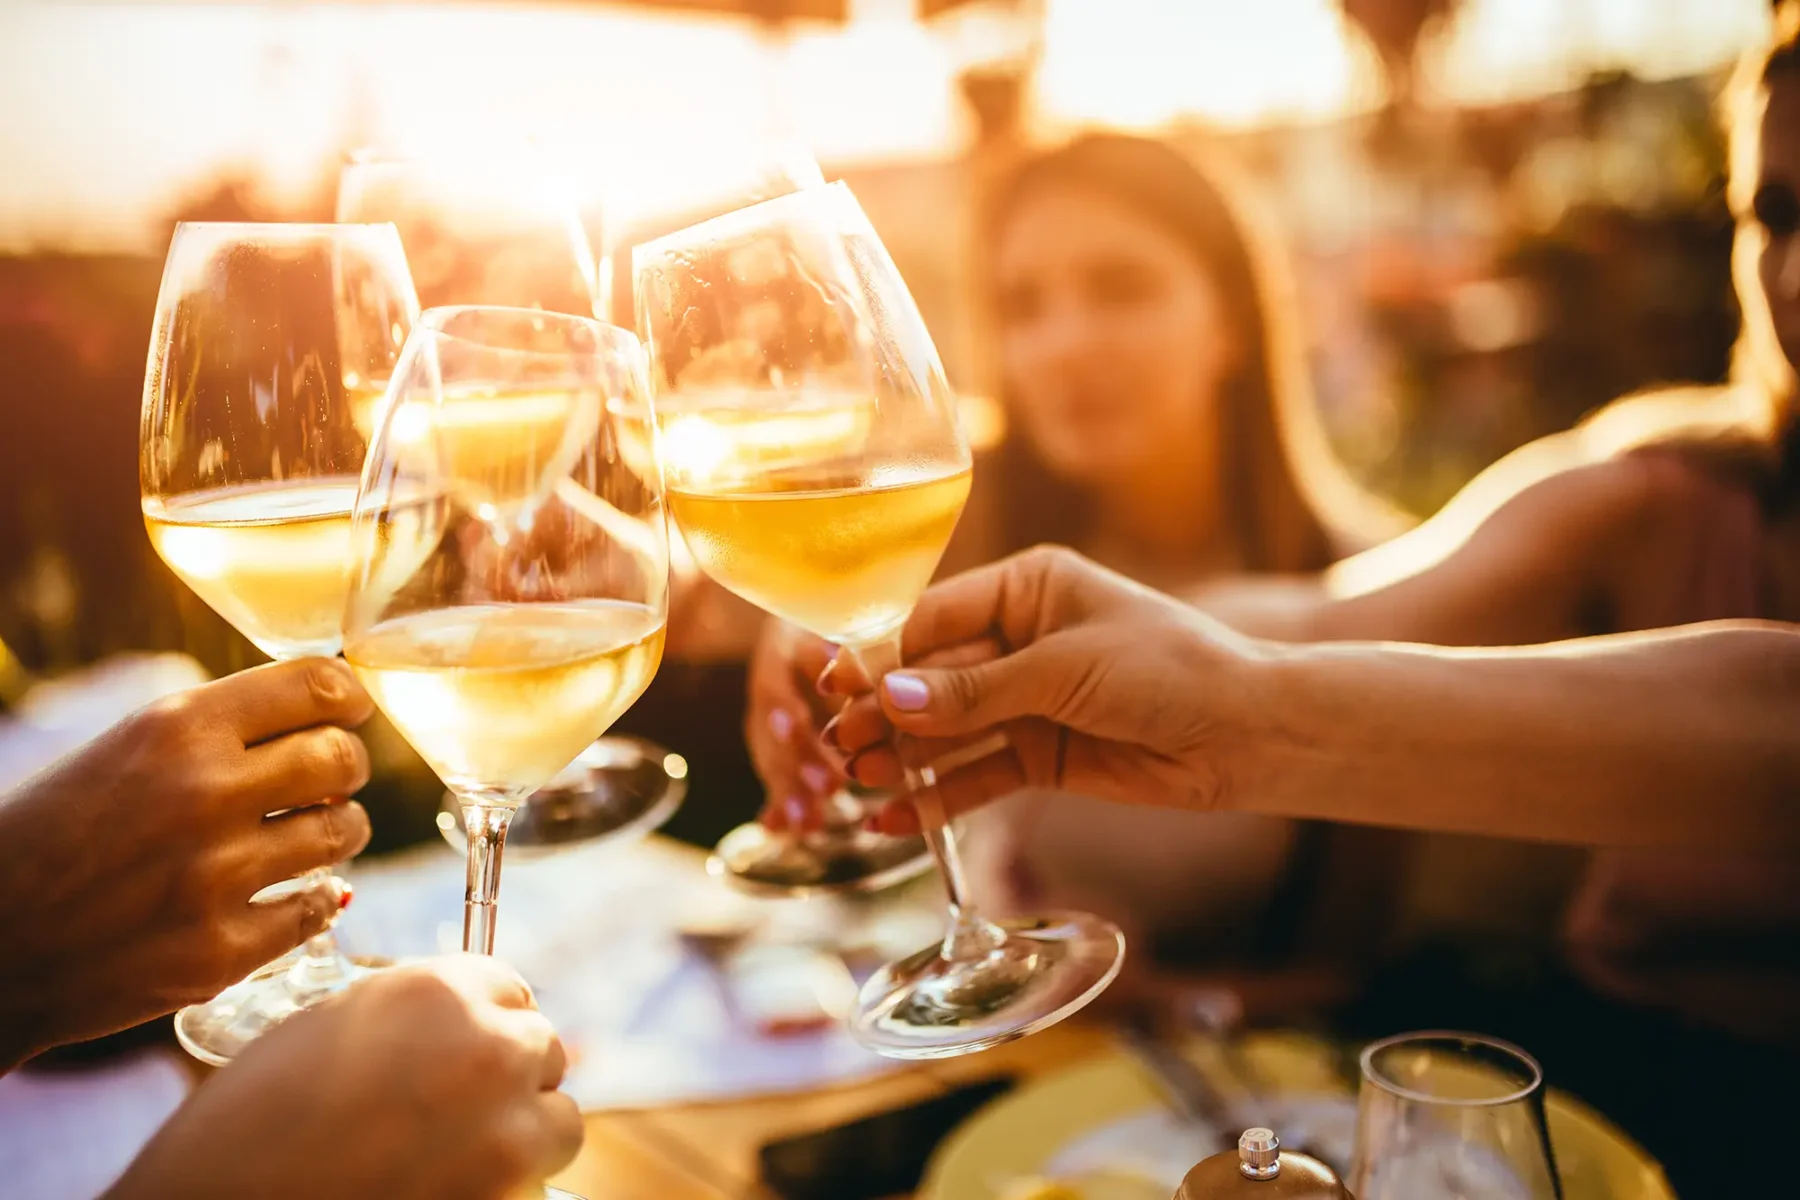 Friends at an outdoor event clinking glasses together for a toast